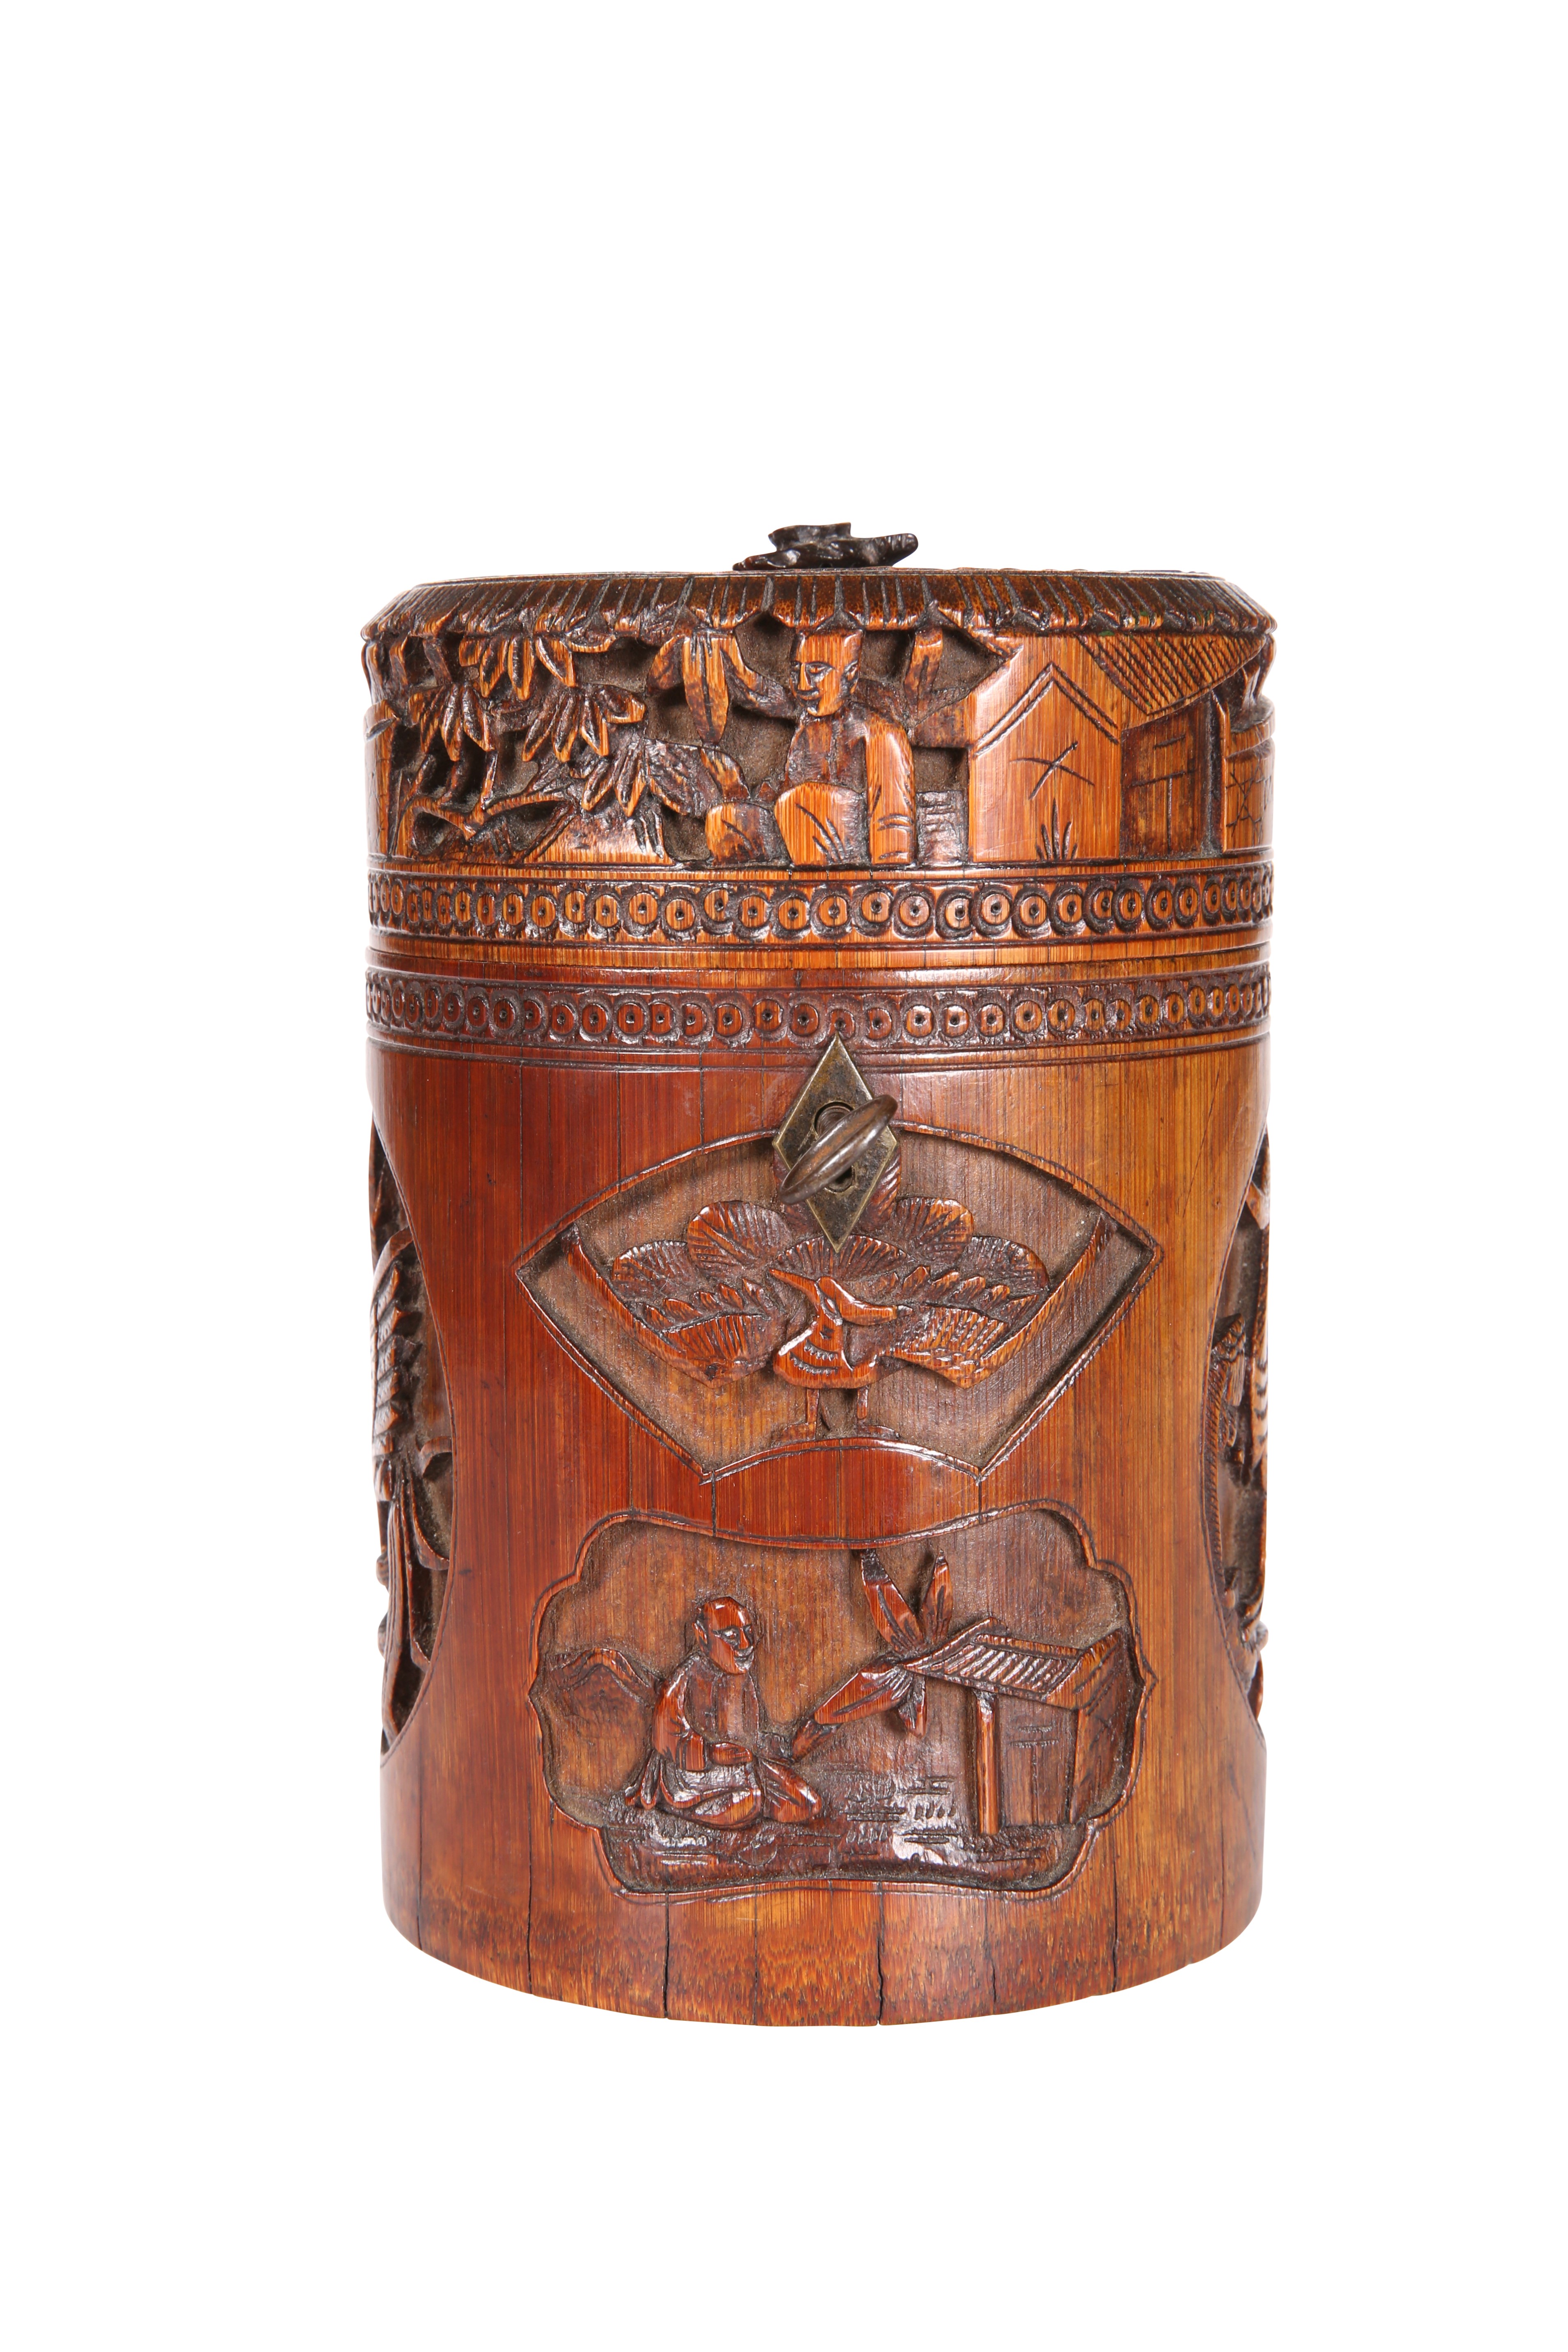 A CHINESE BAMBOO JAR AND COVER, 19TH CENTURY